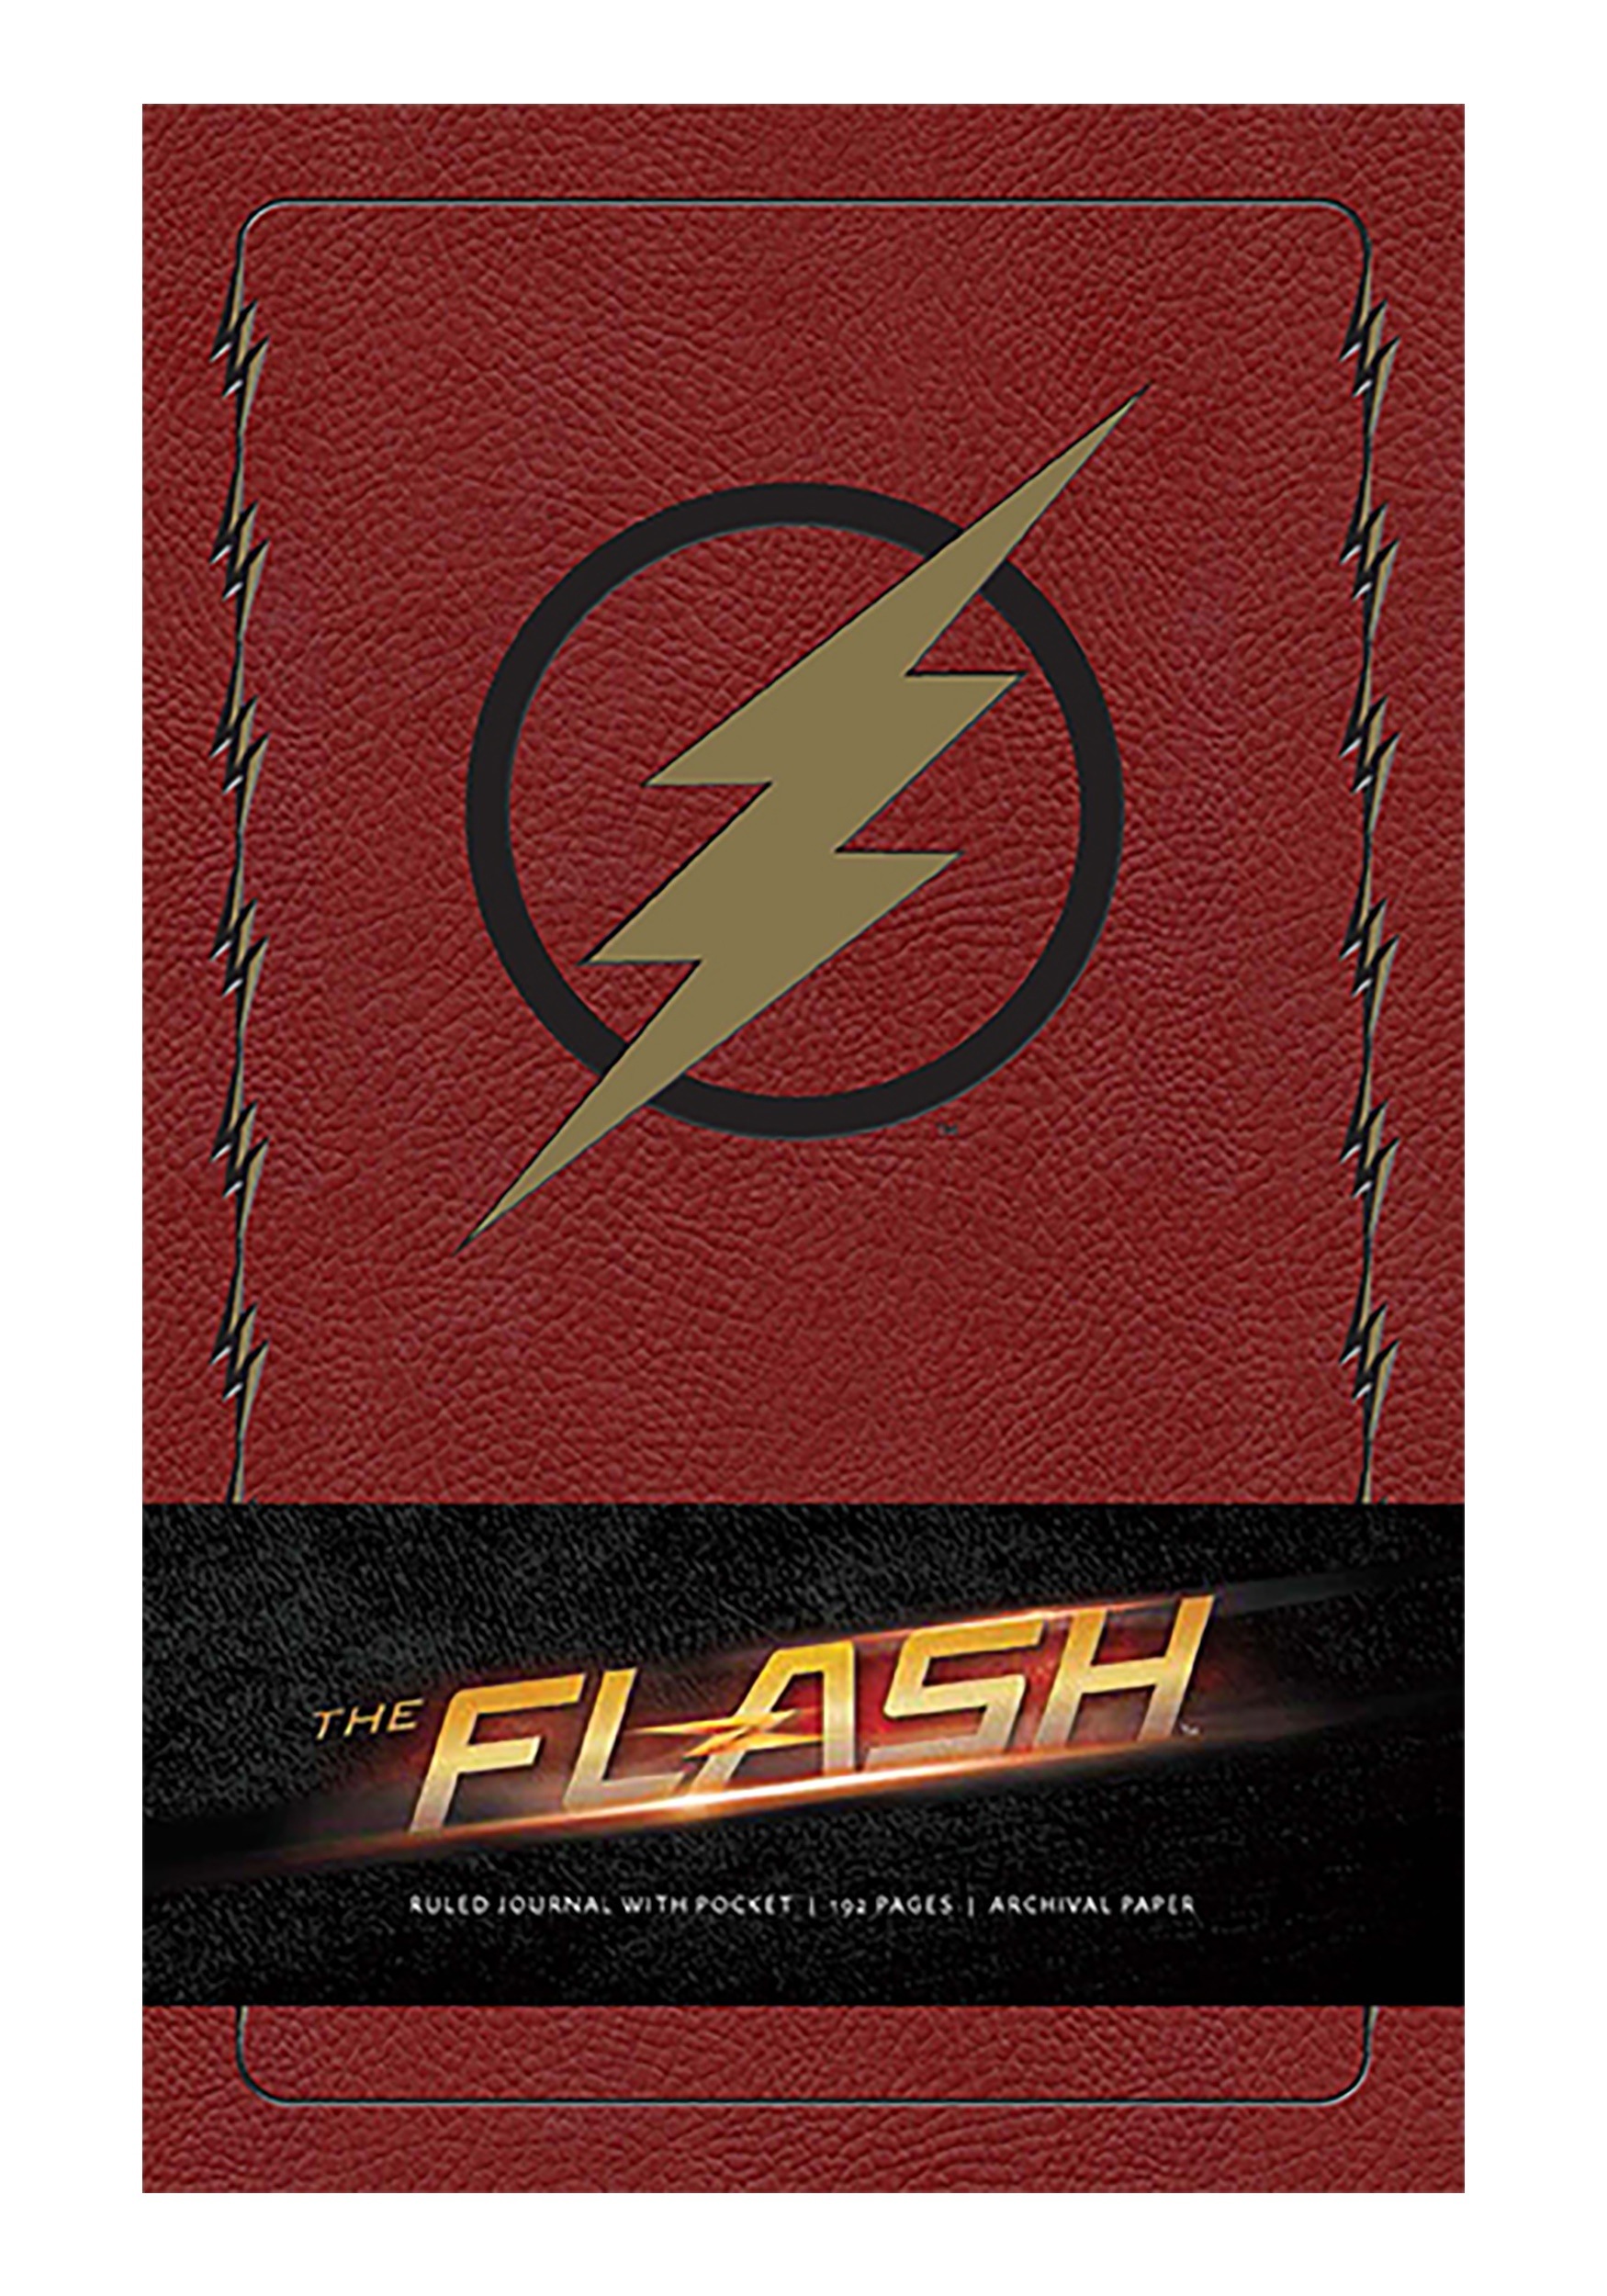 Hardcover Ruled Journal The Flash